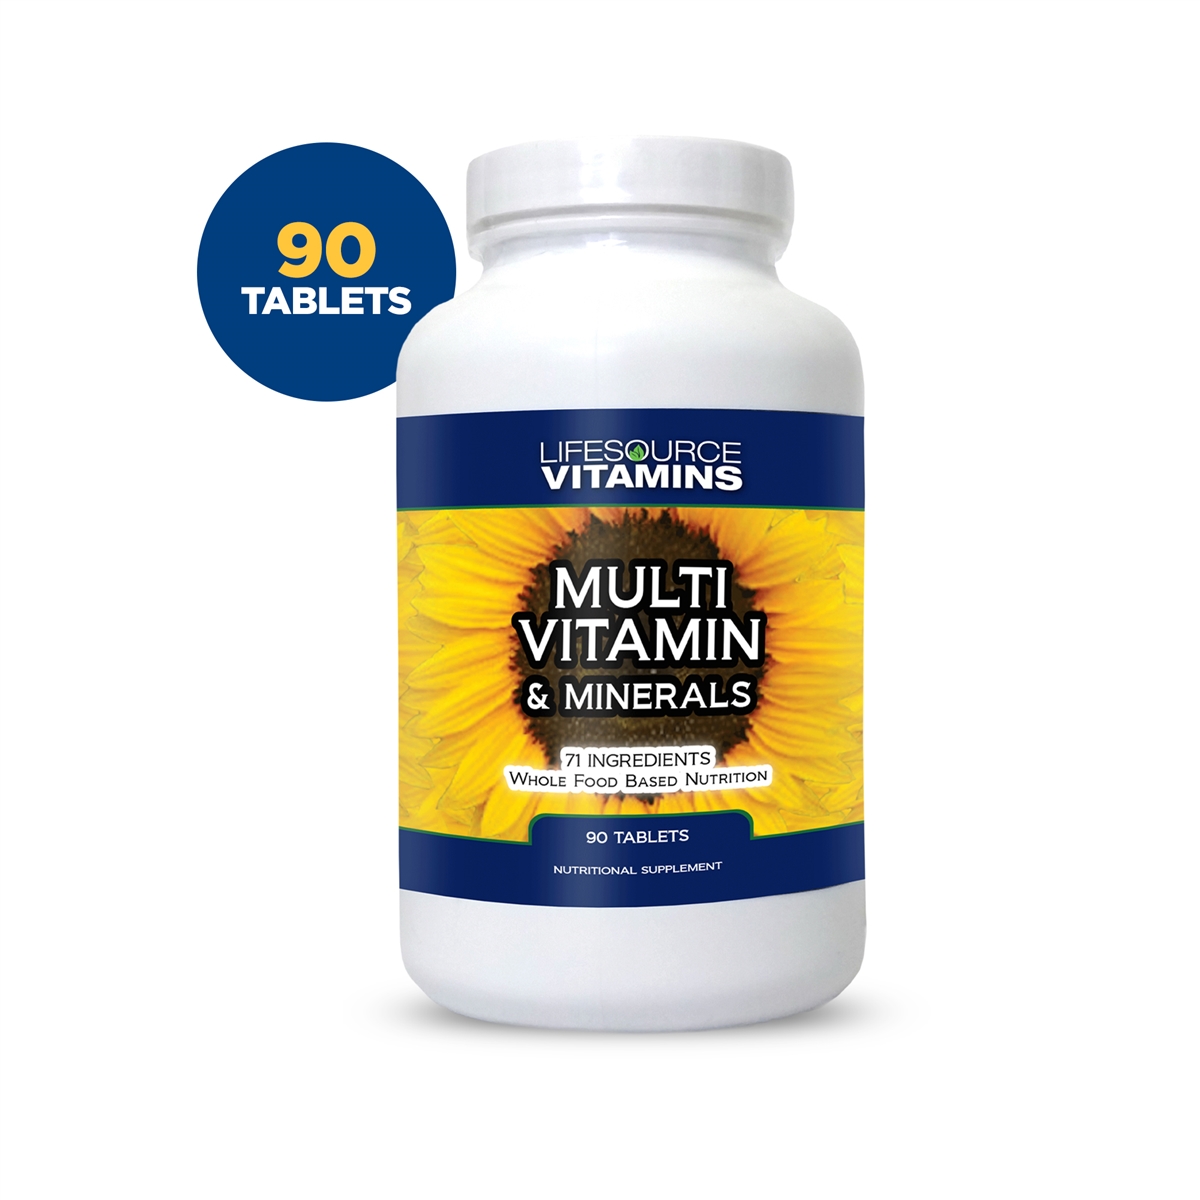 LifeSource Vitamins - Multi-Vitamins & Minerals - 71 Whole Food Based  Ingredients, A uniquely complete, well rounded and scientifically advanced  whole food multivitamin. Tested and Proven since 1992.